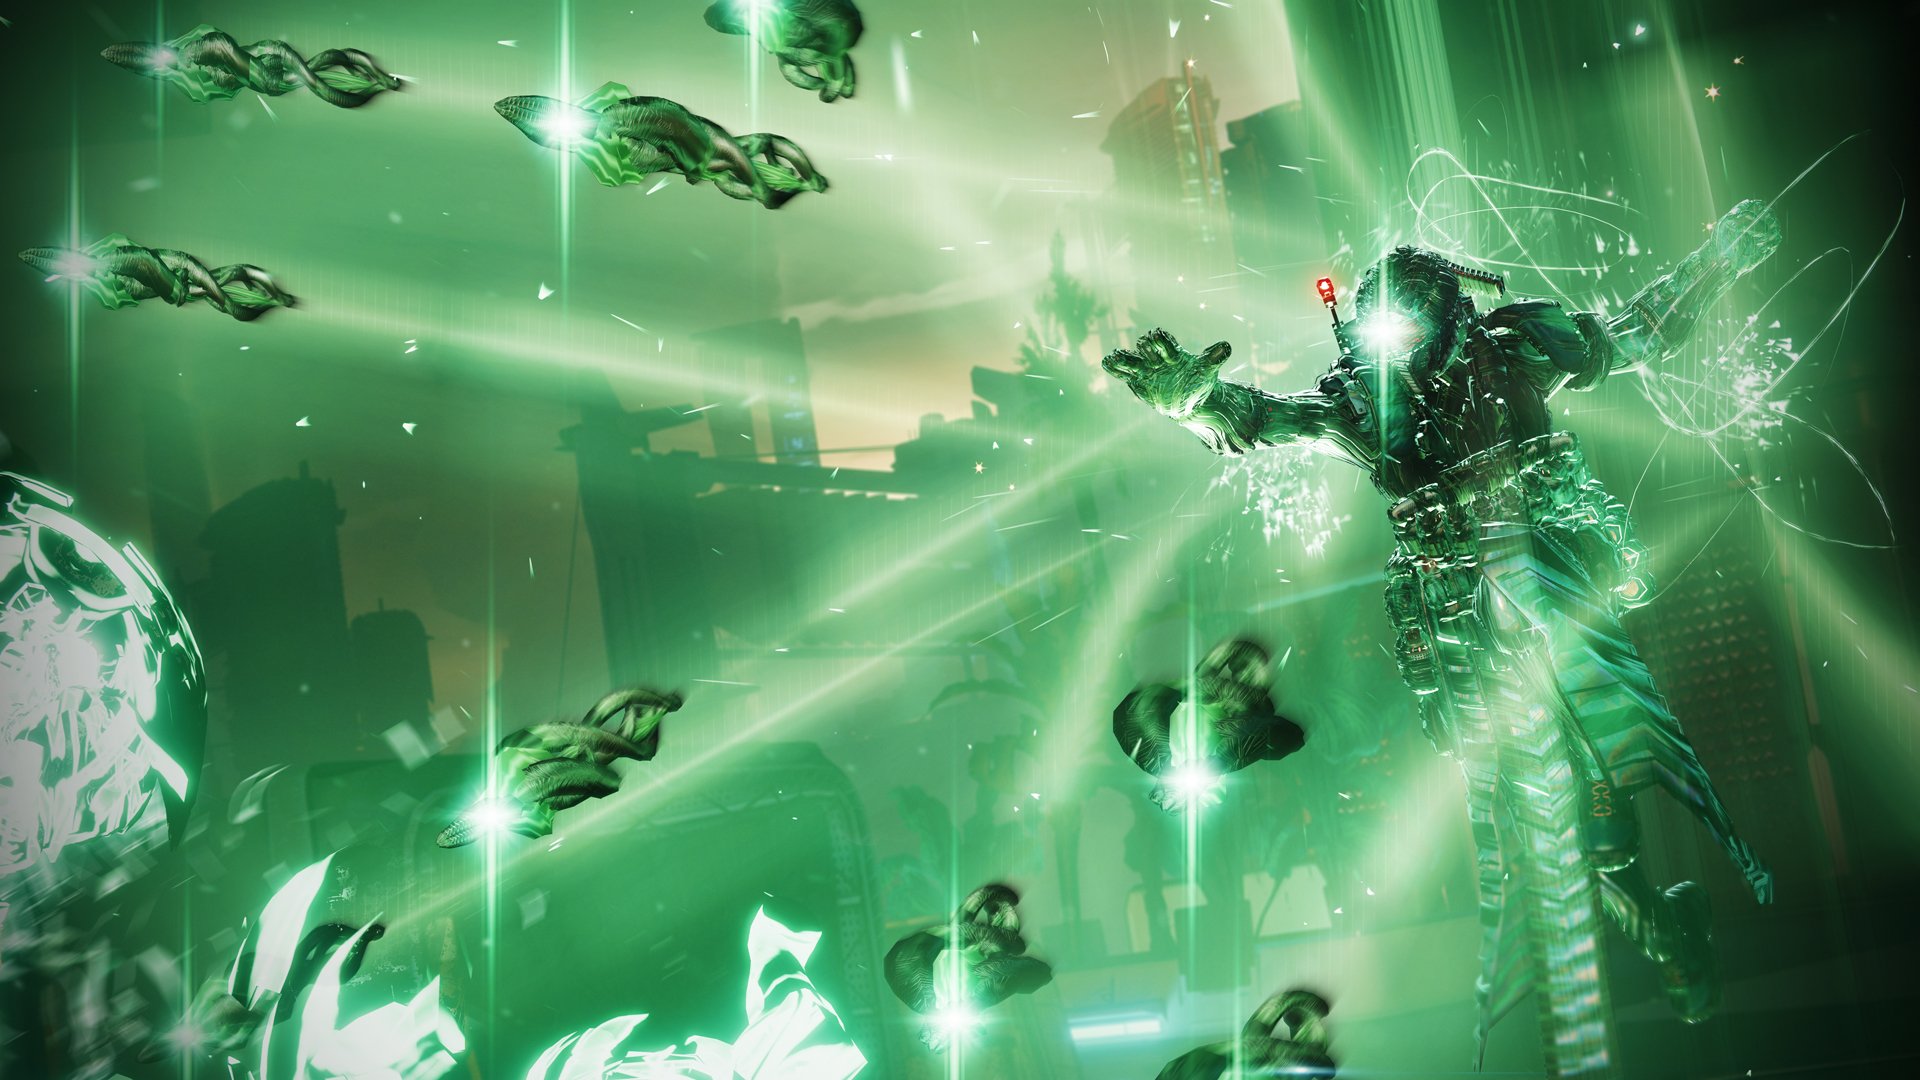 Destiny 2 Showcase introduces new Darkness subclass, Strand, coming with Lightfall expansion